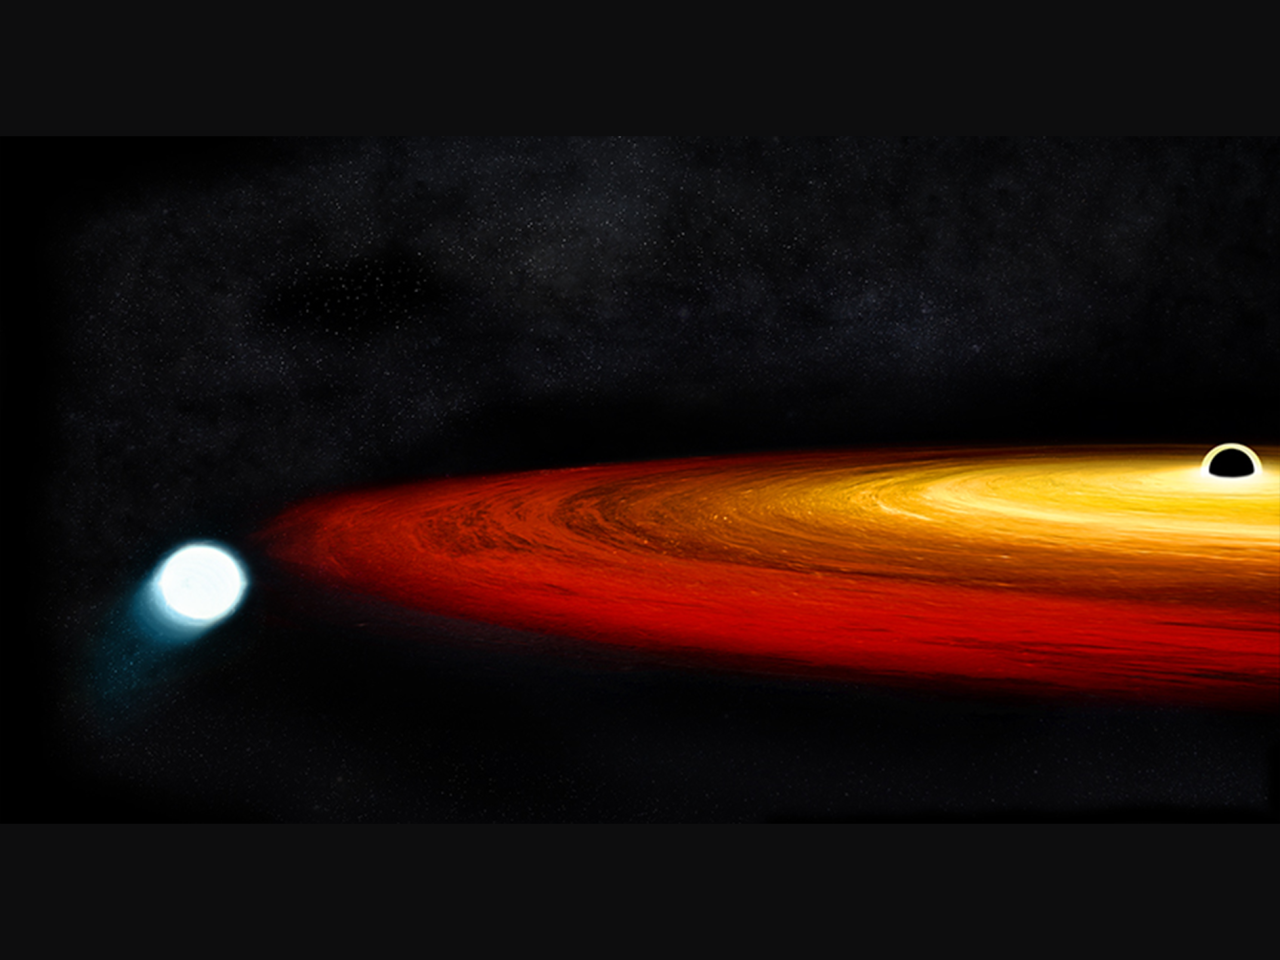 An illustration of the white dwarf orbiting the black hole in GSN 069